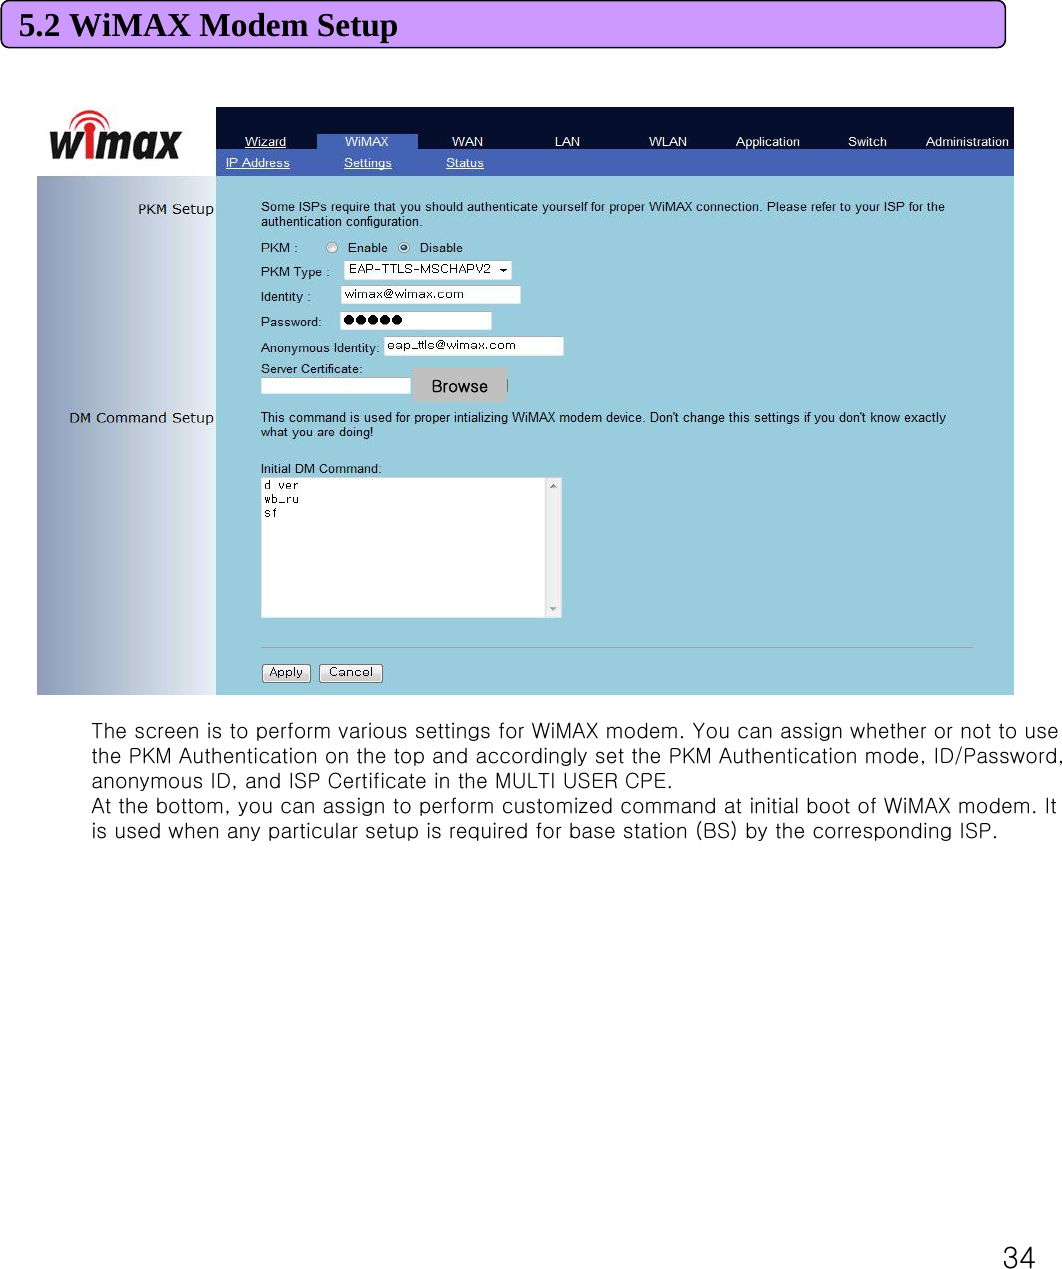 34The screen is to perform various settings for WiMAX modem. You can assign whether or not to use the PKM Authentication on the top and accordingly set the PKM Authentication mode, ID/Password, anonymous ID, and ISP Certificate in the MULTI USER CPE.At the bottom, you can assign to perform customized command at initial boot of WiMAX modem. It is used when any particular setup is required for base station (BS) by the corresponding ISP.5.2 WiMAX Modem Setup Browse